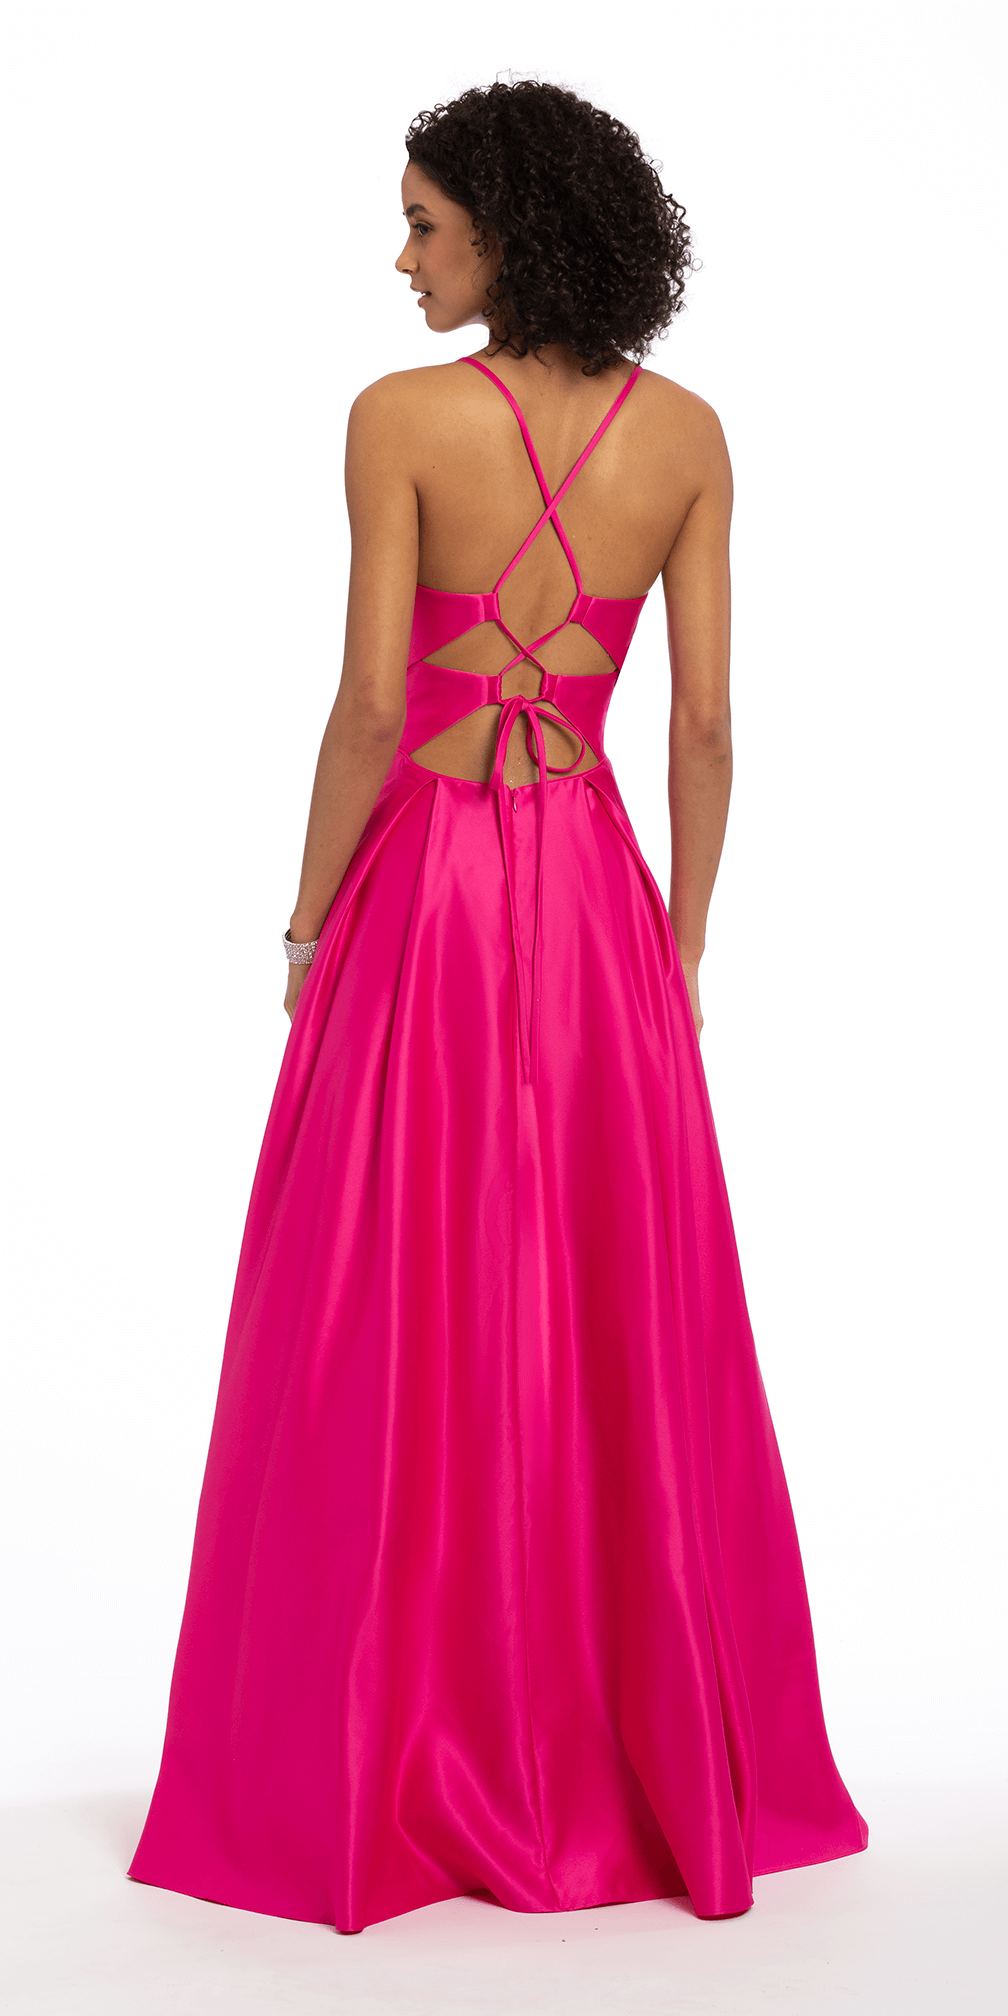 Camille La Vie Sweetheart Lace Up Back Ballgown with Pockets